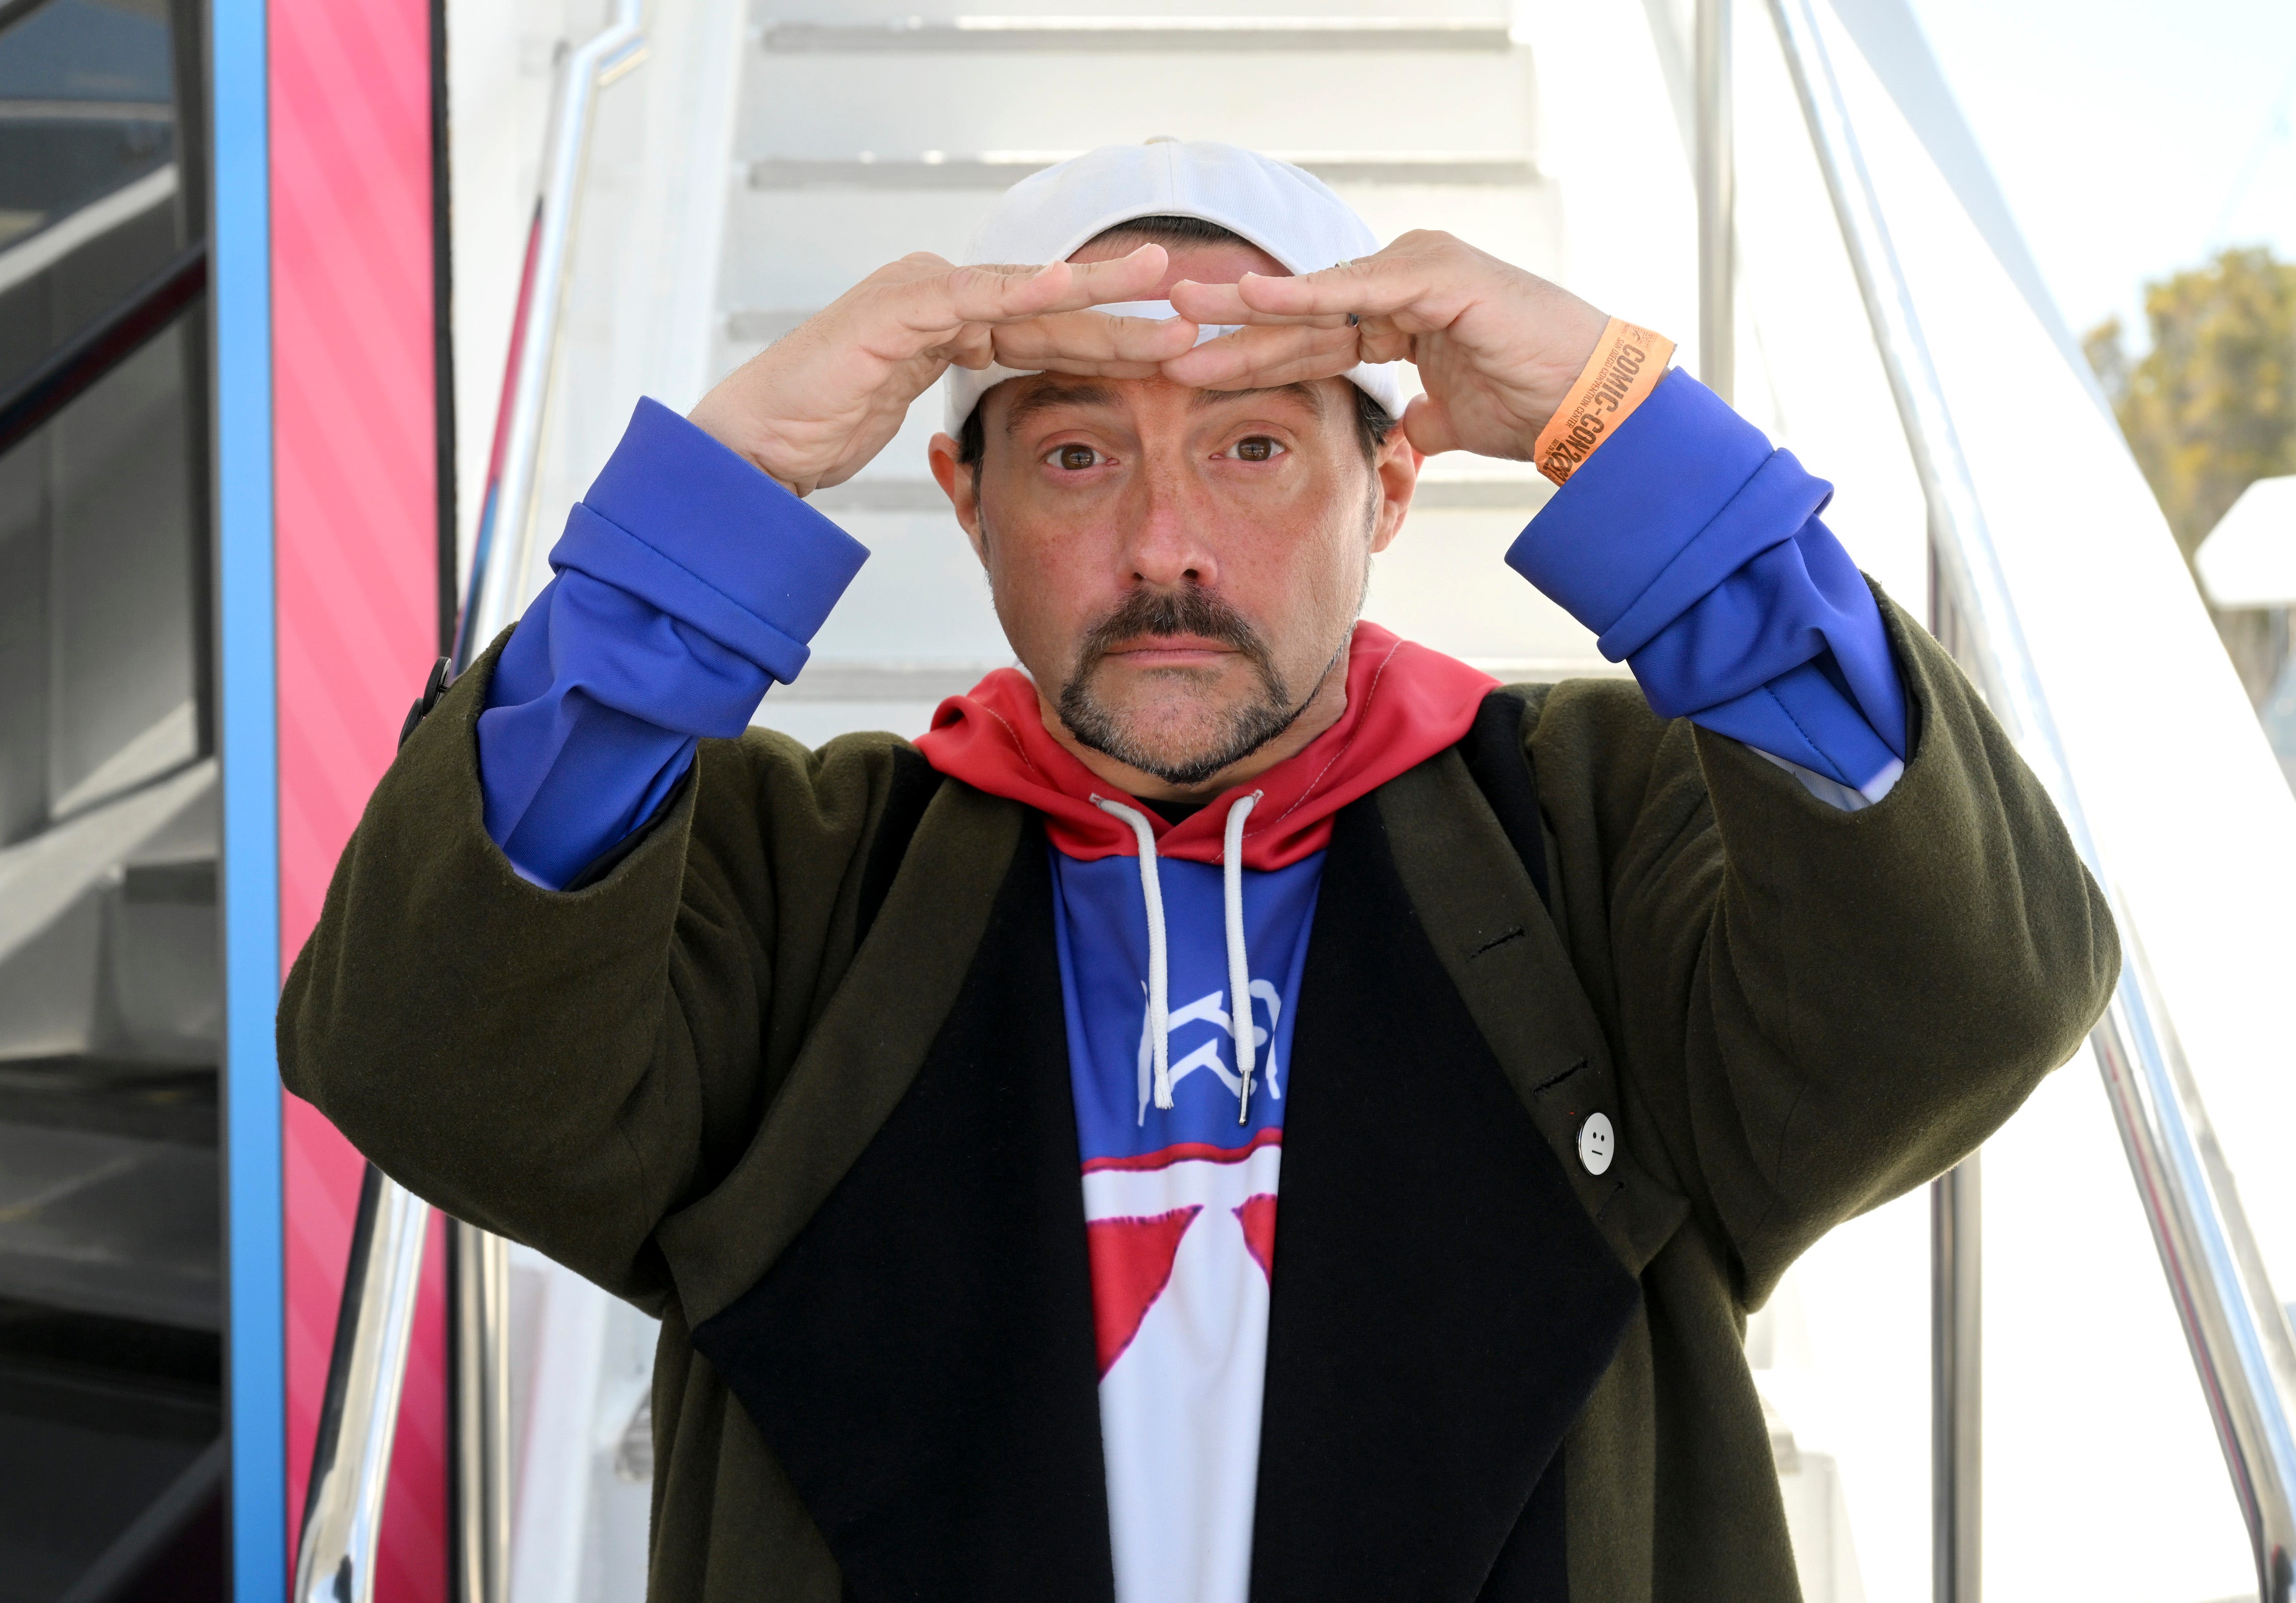 Kevin Smith Almost Talks About ComicCon The Ankler.